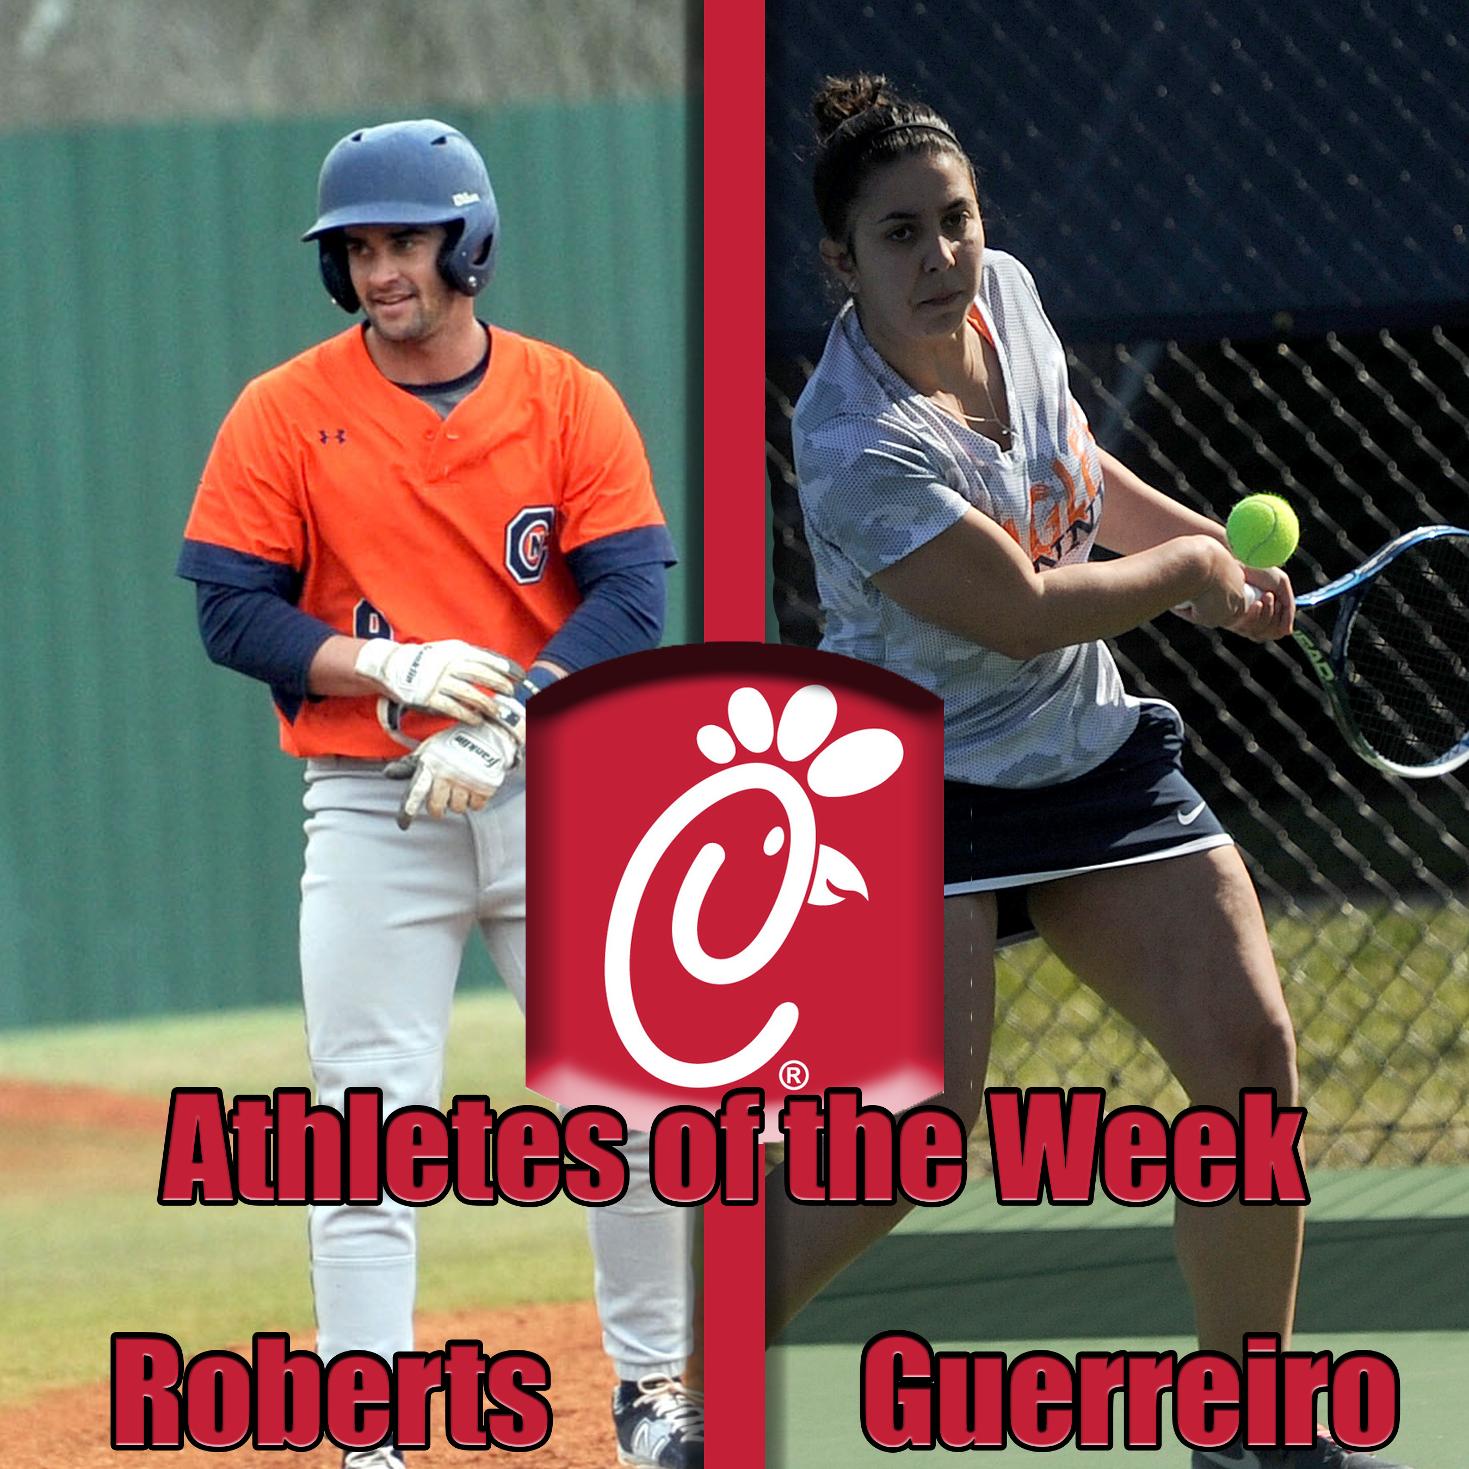 Roberts, Guerreiro net Chick-Fil-A Athlete of the Week honors